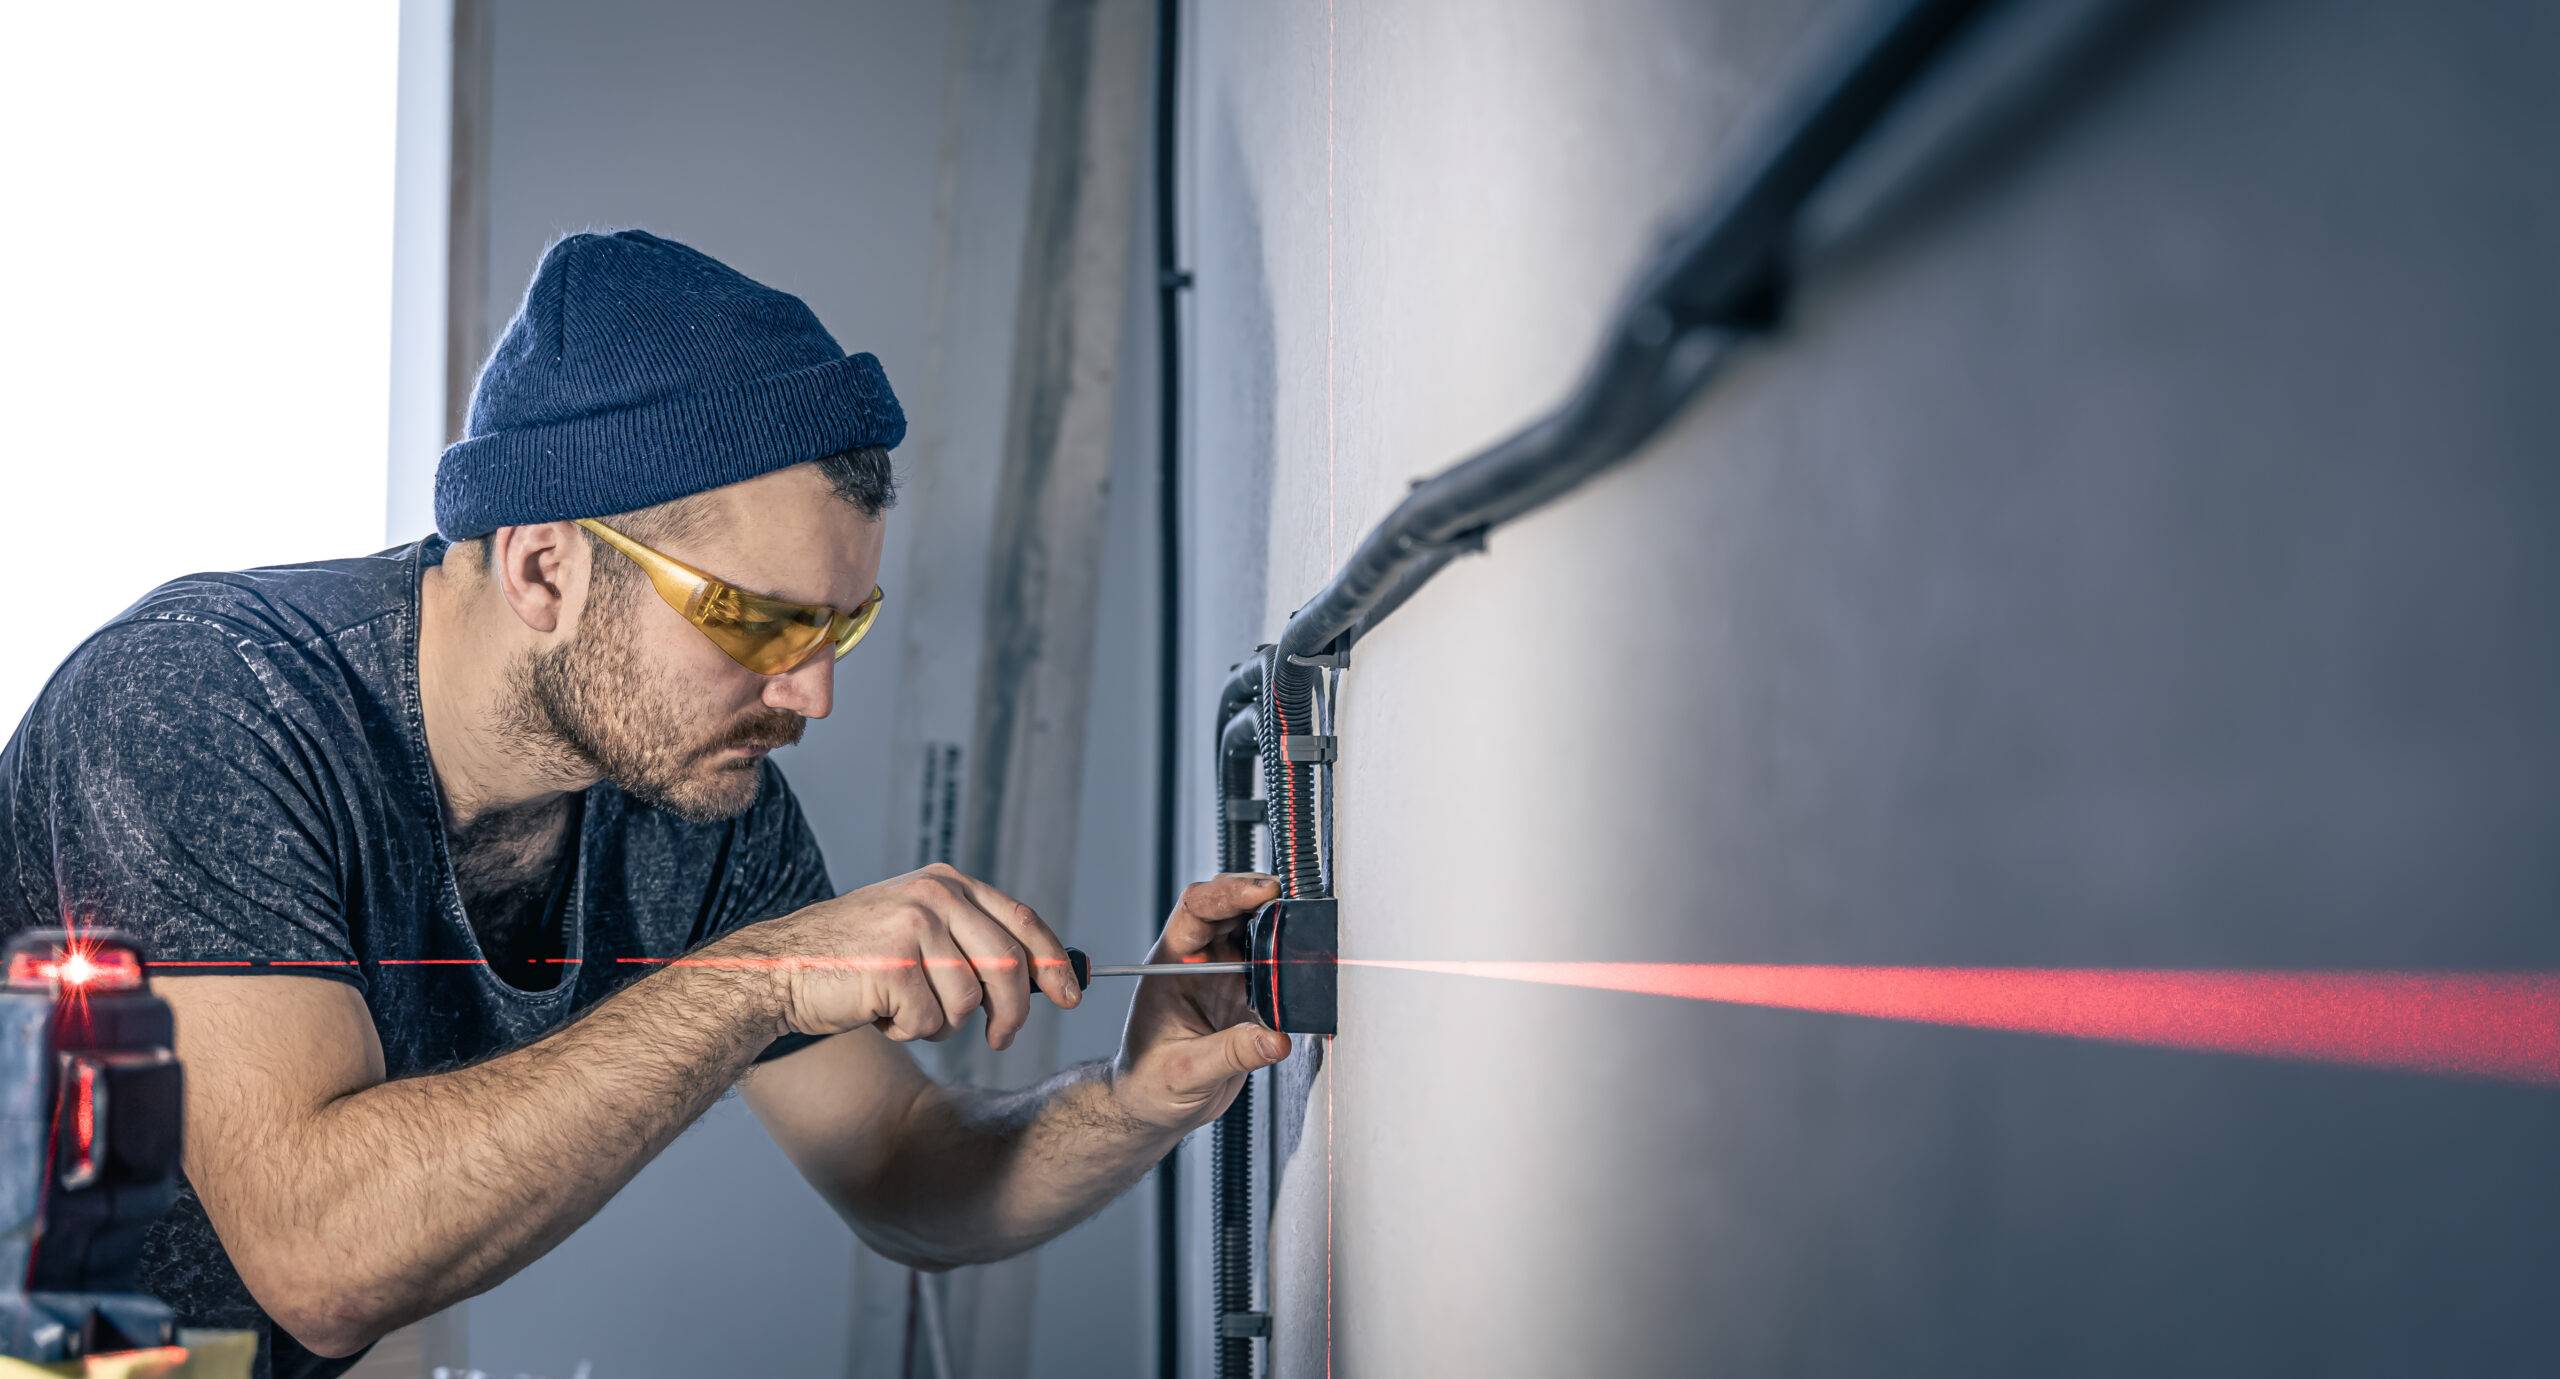 Electrical Repairs and Safety: What You Need to Know